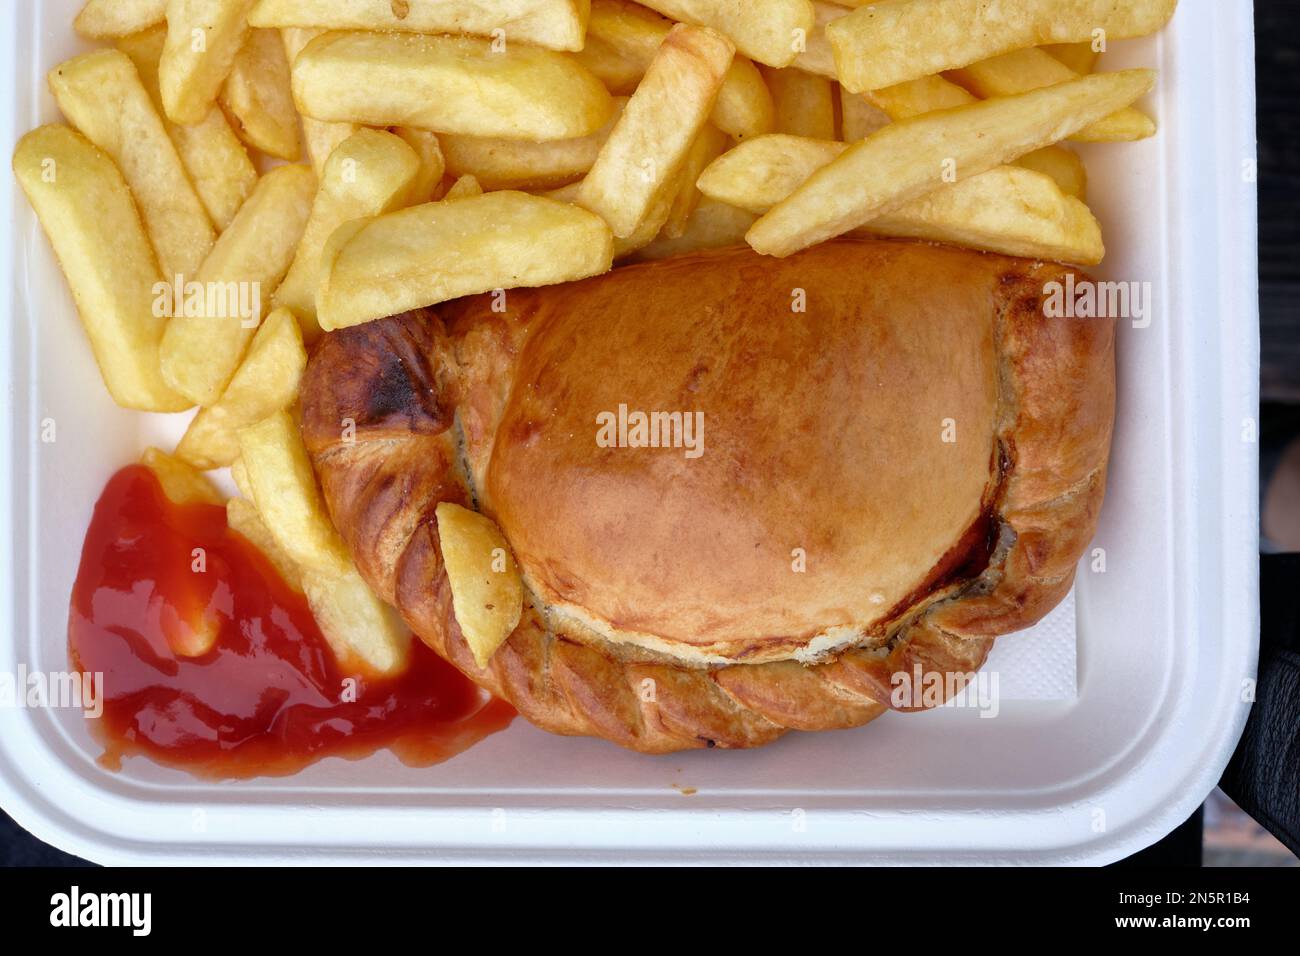 Authentic cornish pasty served with thick cut chips and ketchup in take-out tray Stock Photo